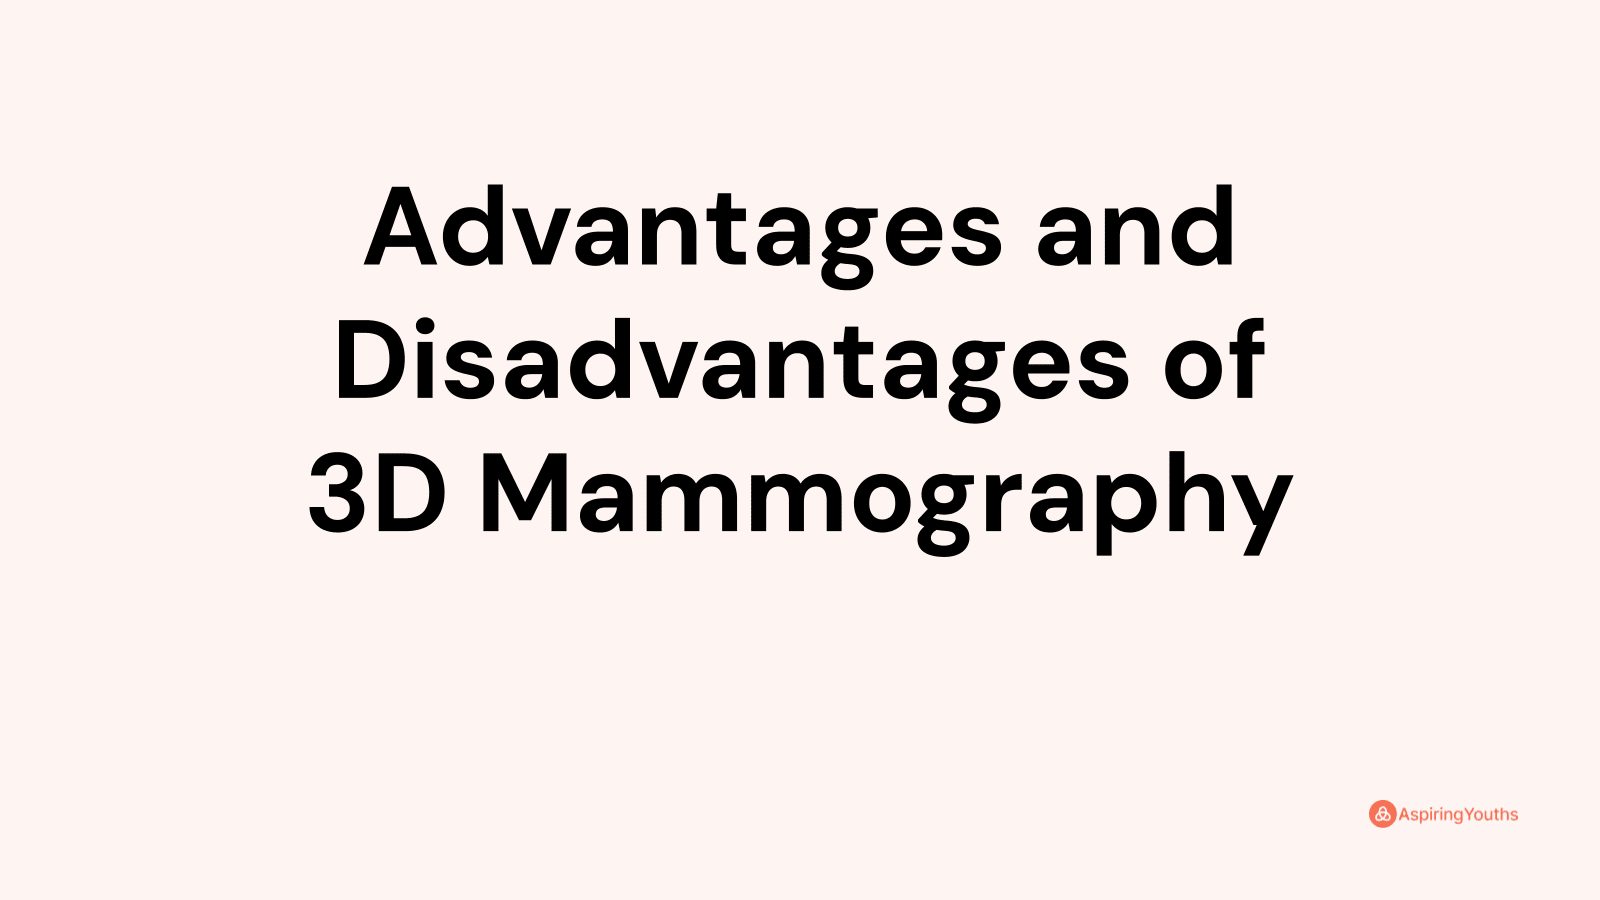 Advantages and disadvantages of 3D Mammography